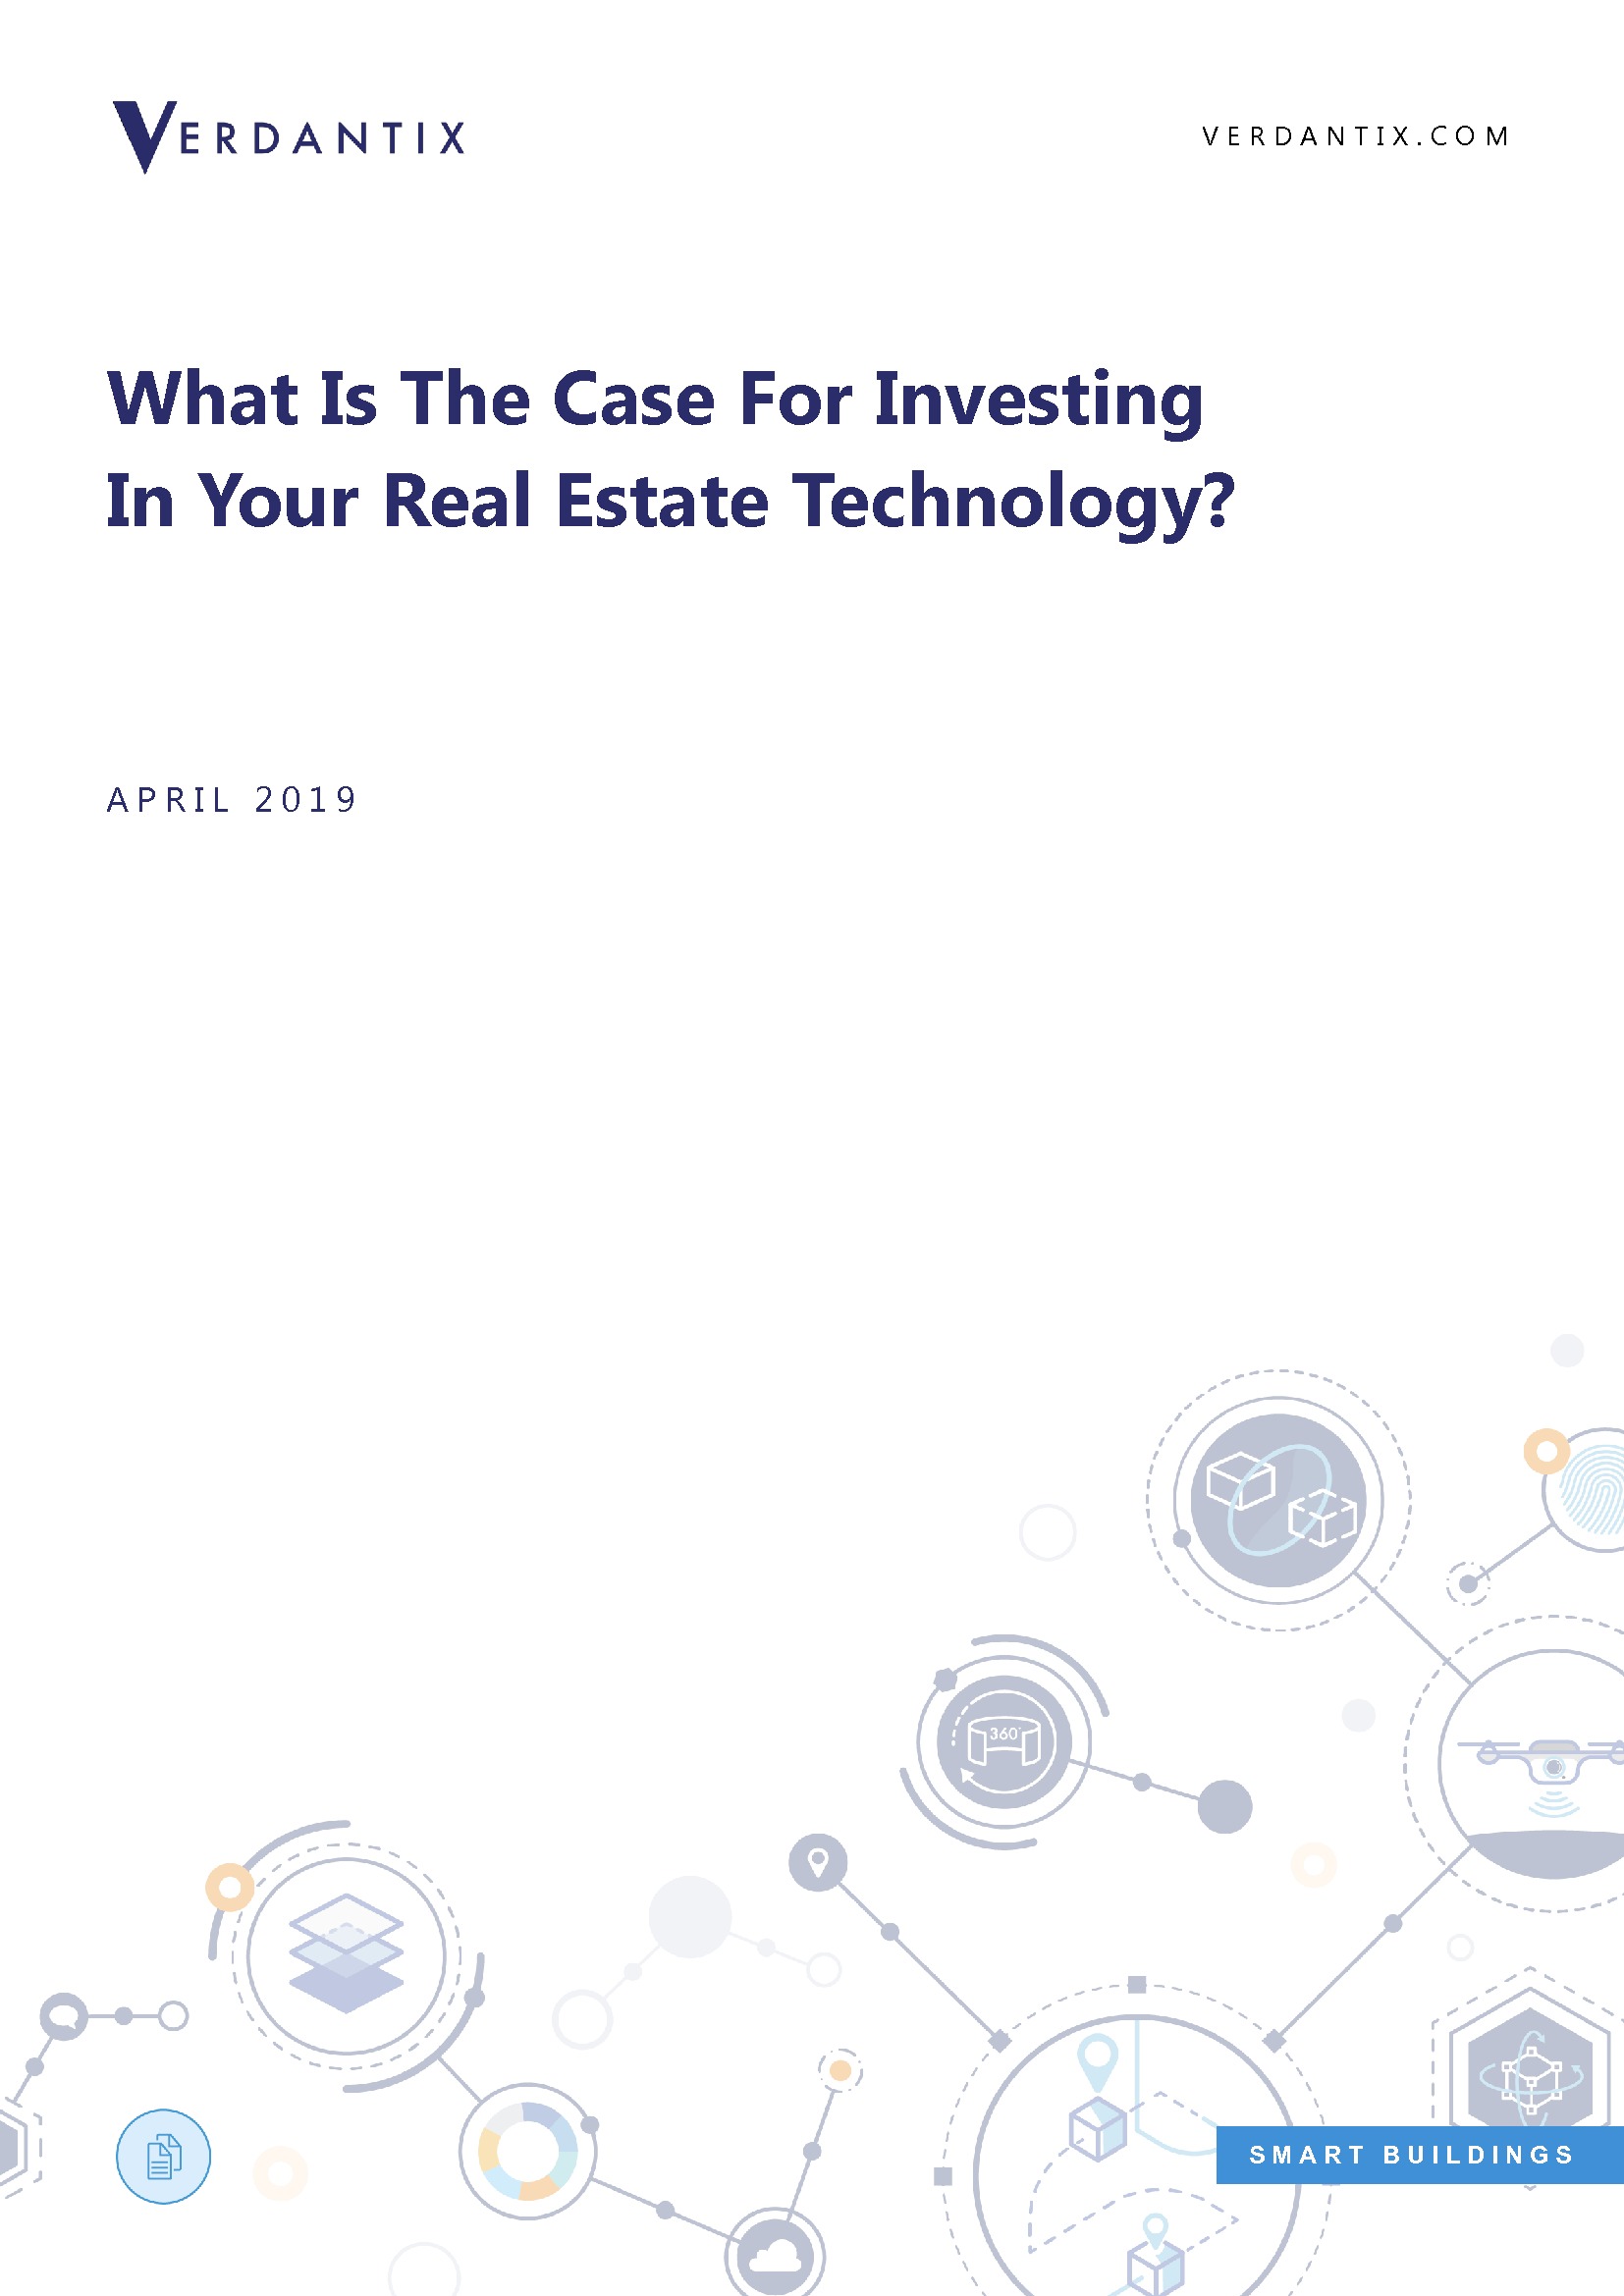 What is the Case for Investing in your Real Estate Technology?